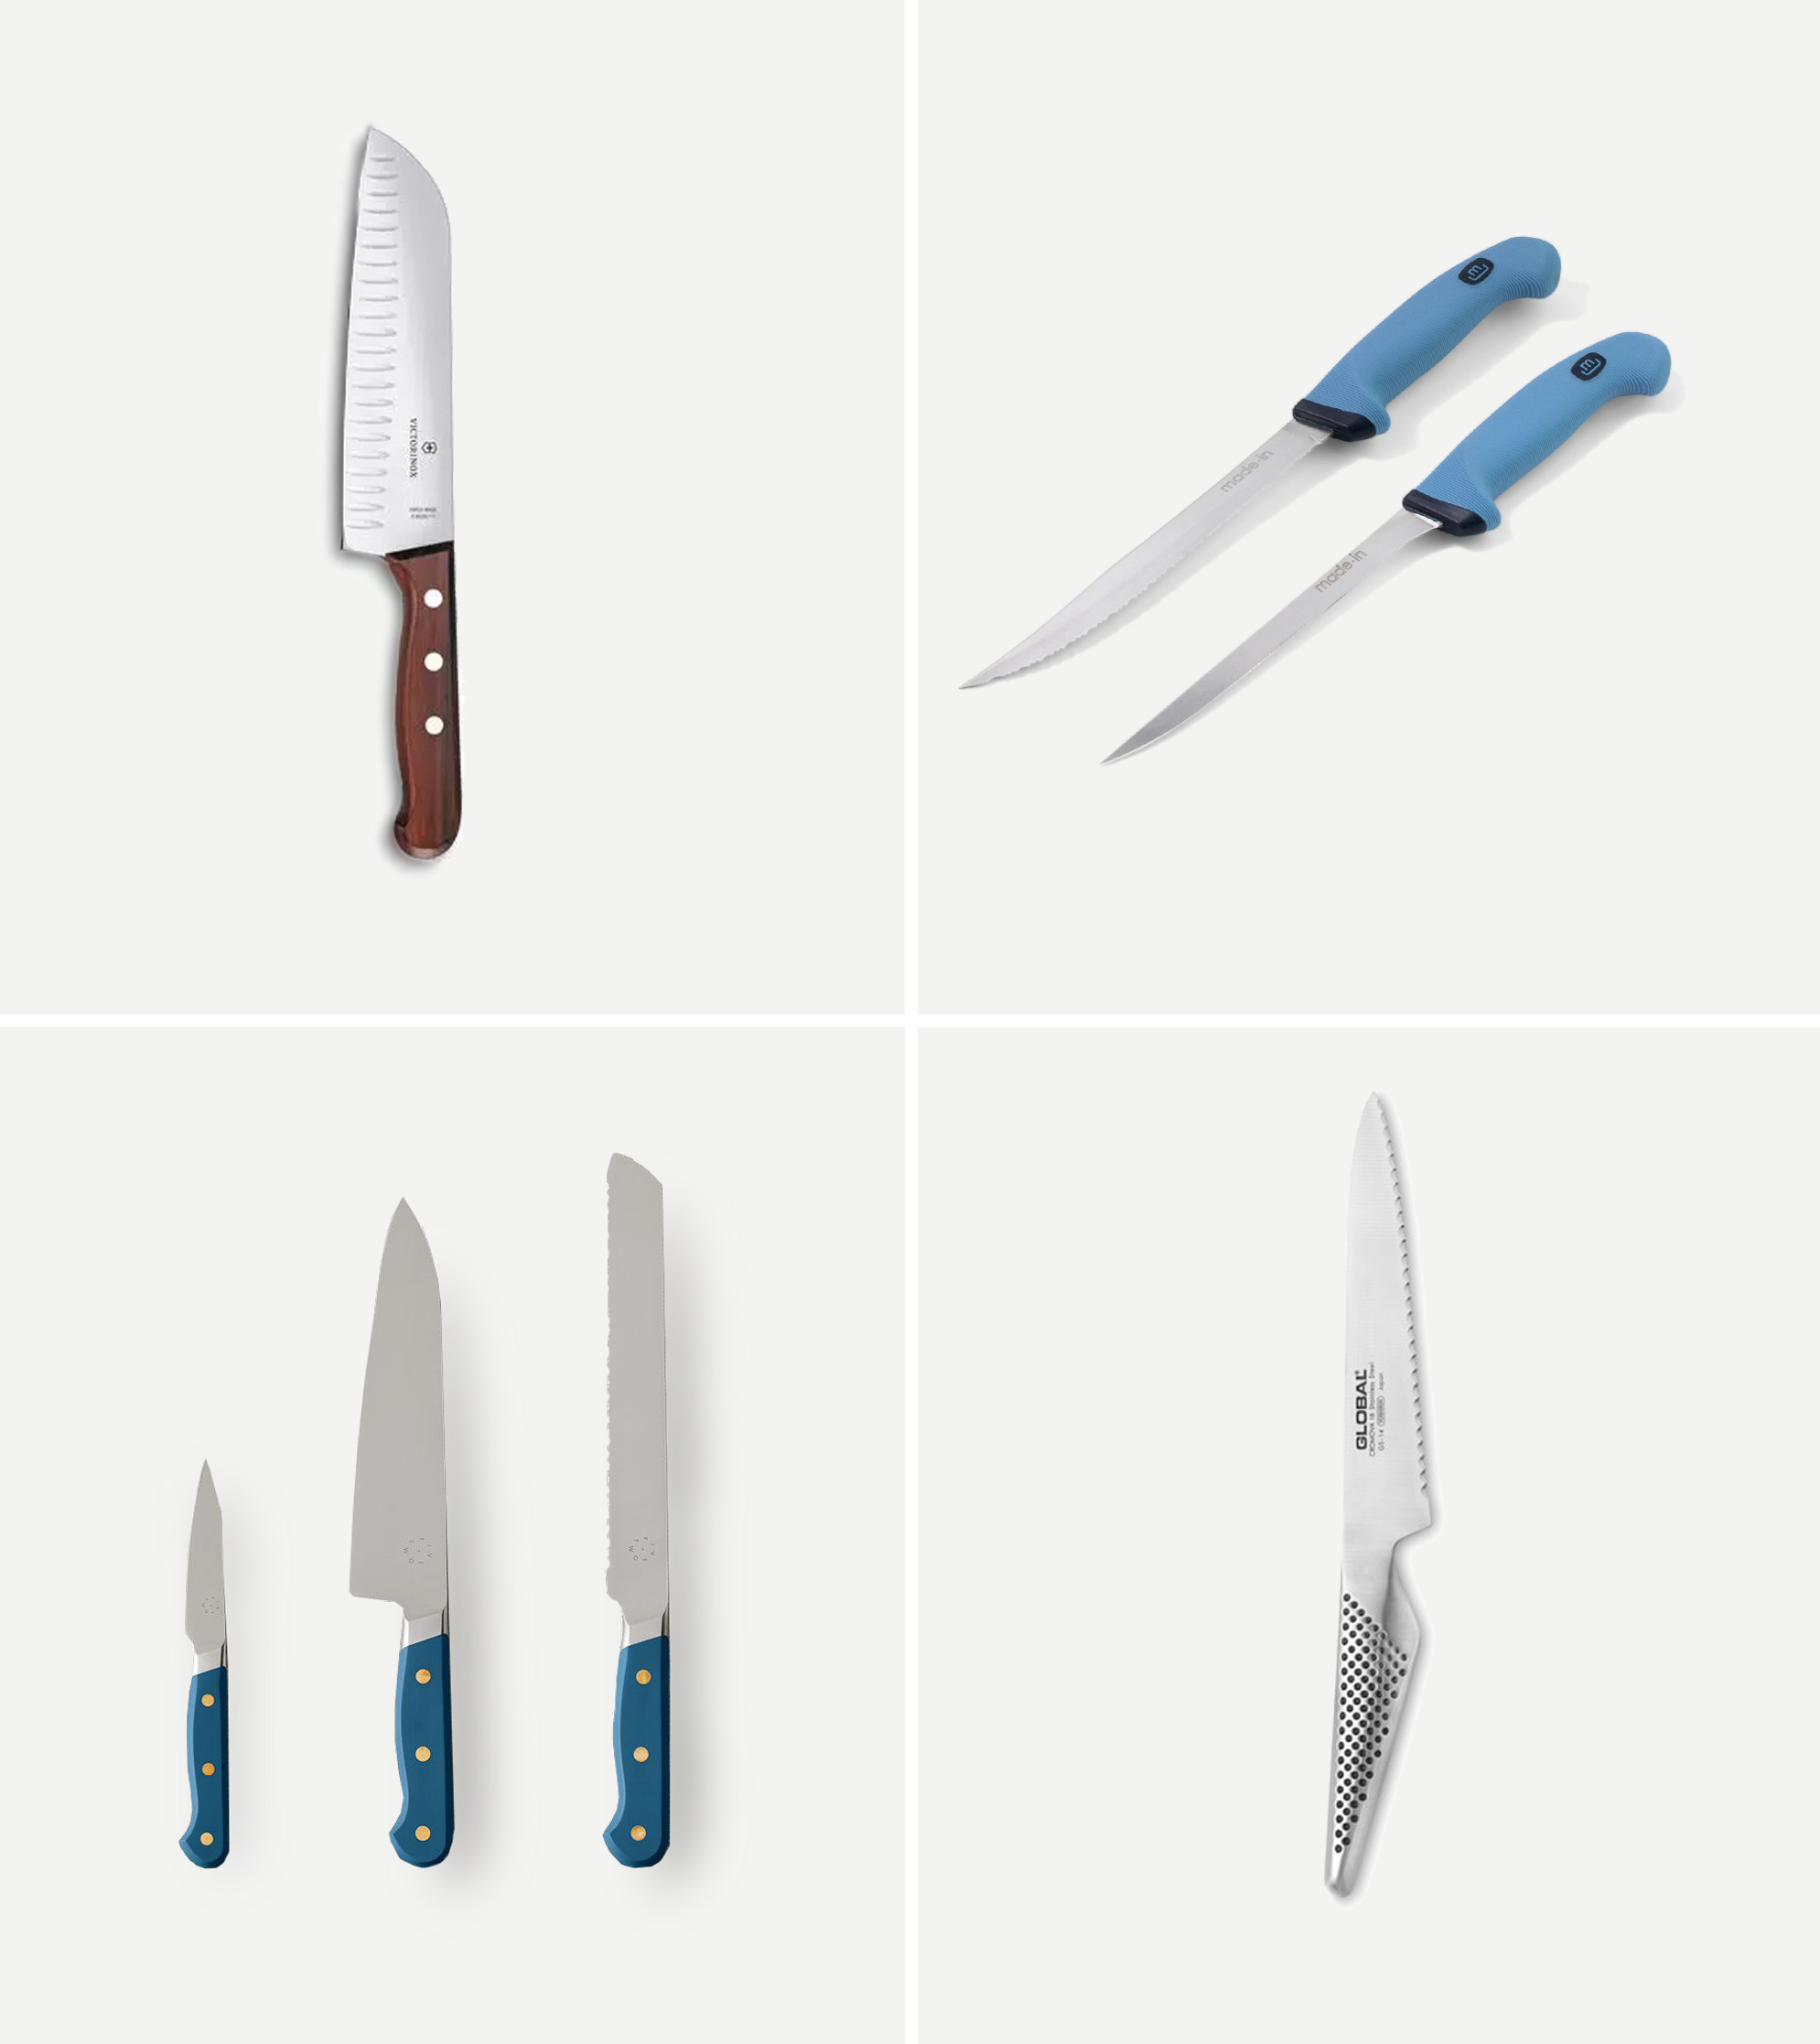 Anyone have any experience with Coolina? They have some really interesting  blade shapes. : r/chefknives